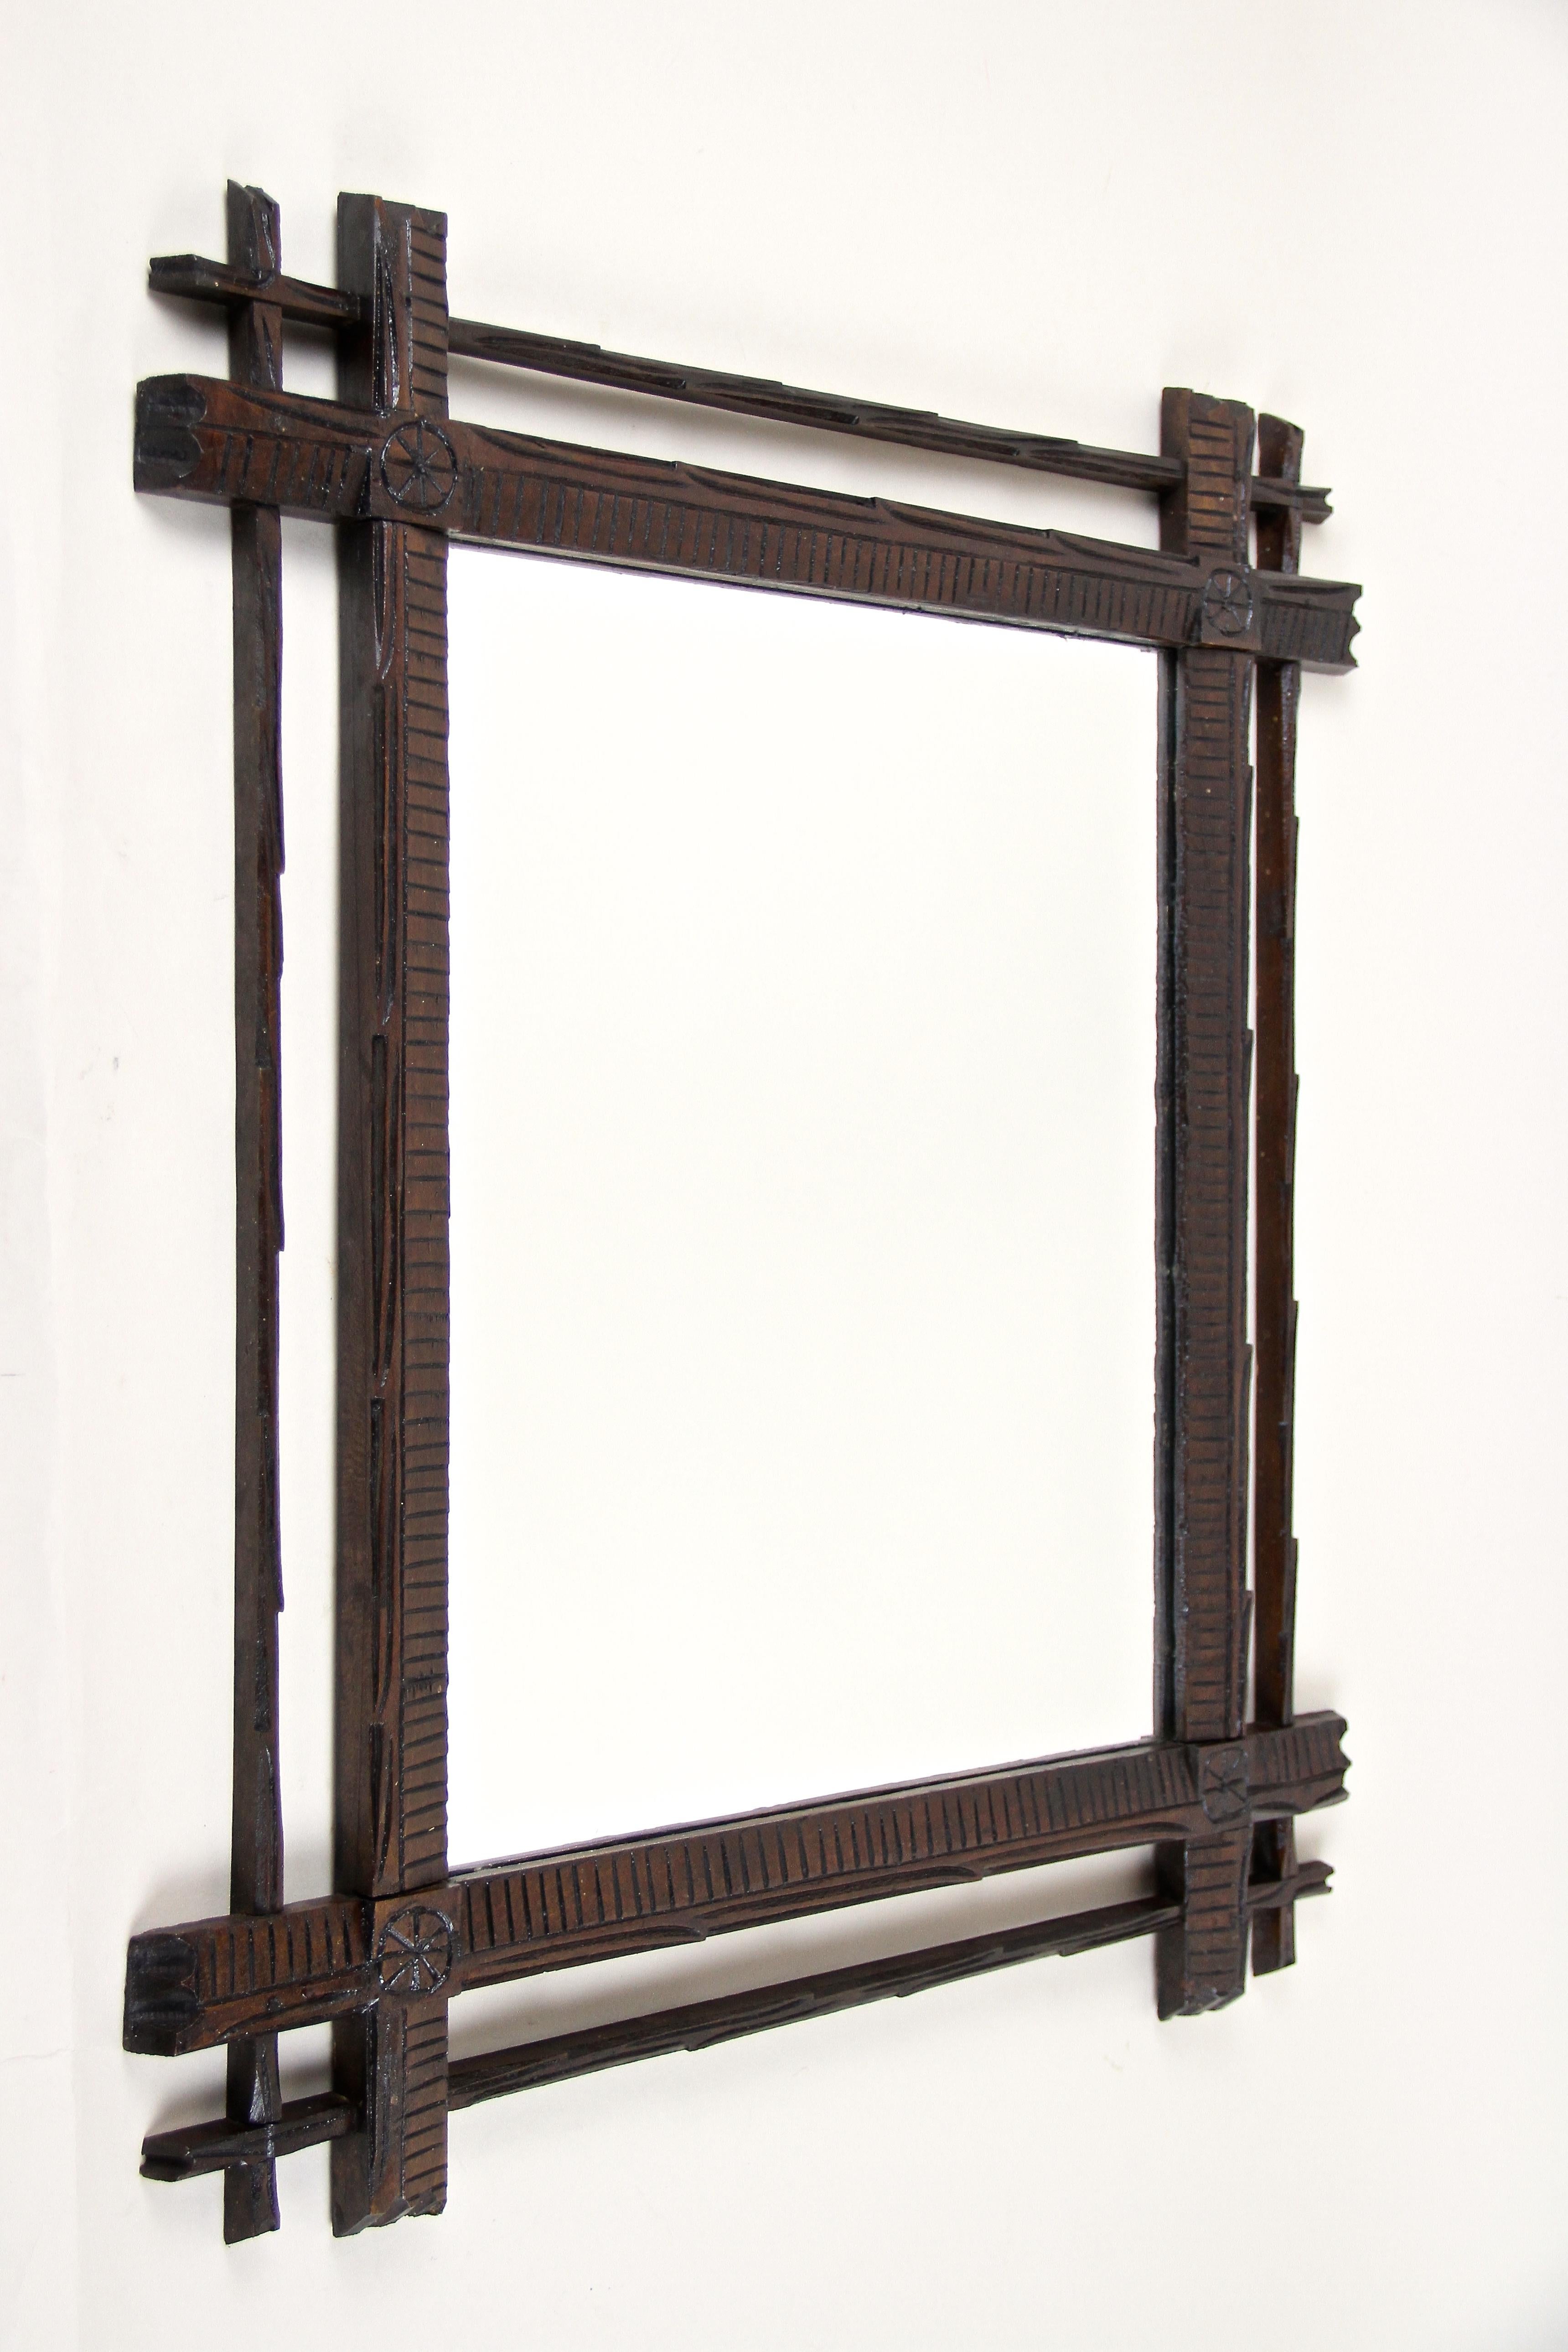 Unusual hand carved Black Forest wall mirror with double frame out of Austria around 1880. A charming piece of a rustic Black Forest mirror, elaborately hand carved out of basswood, showing a very dark brown stained surface. Framed by slim bars in